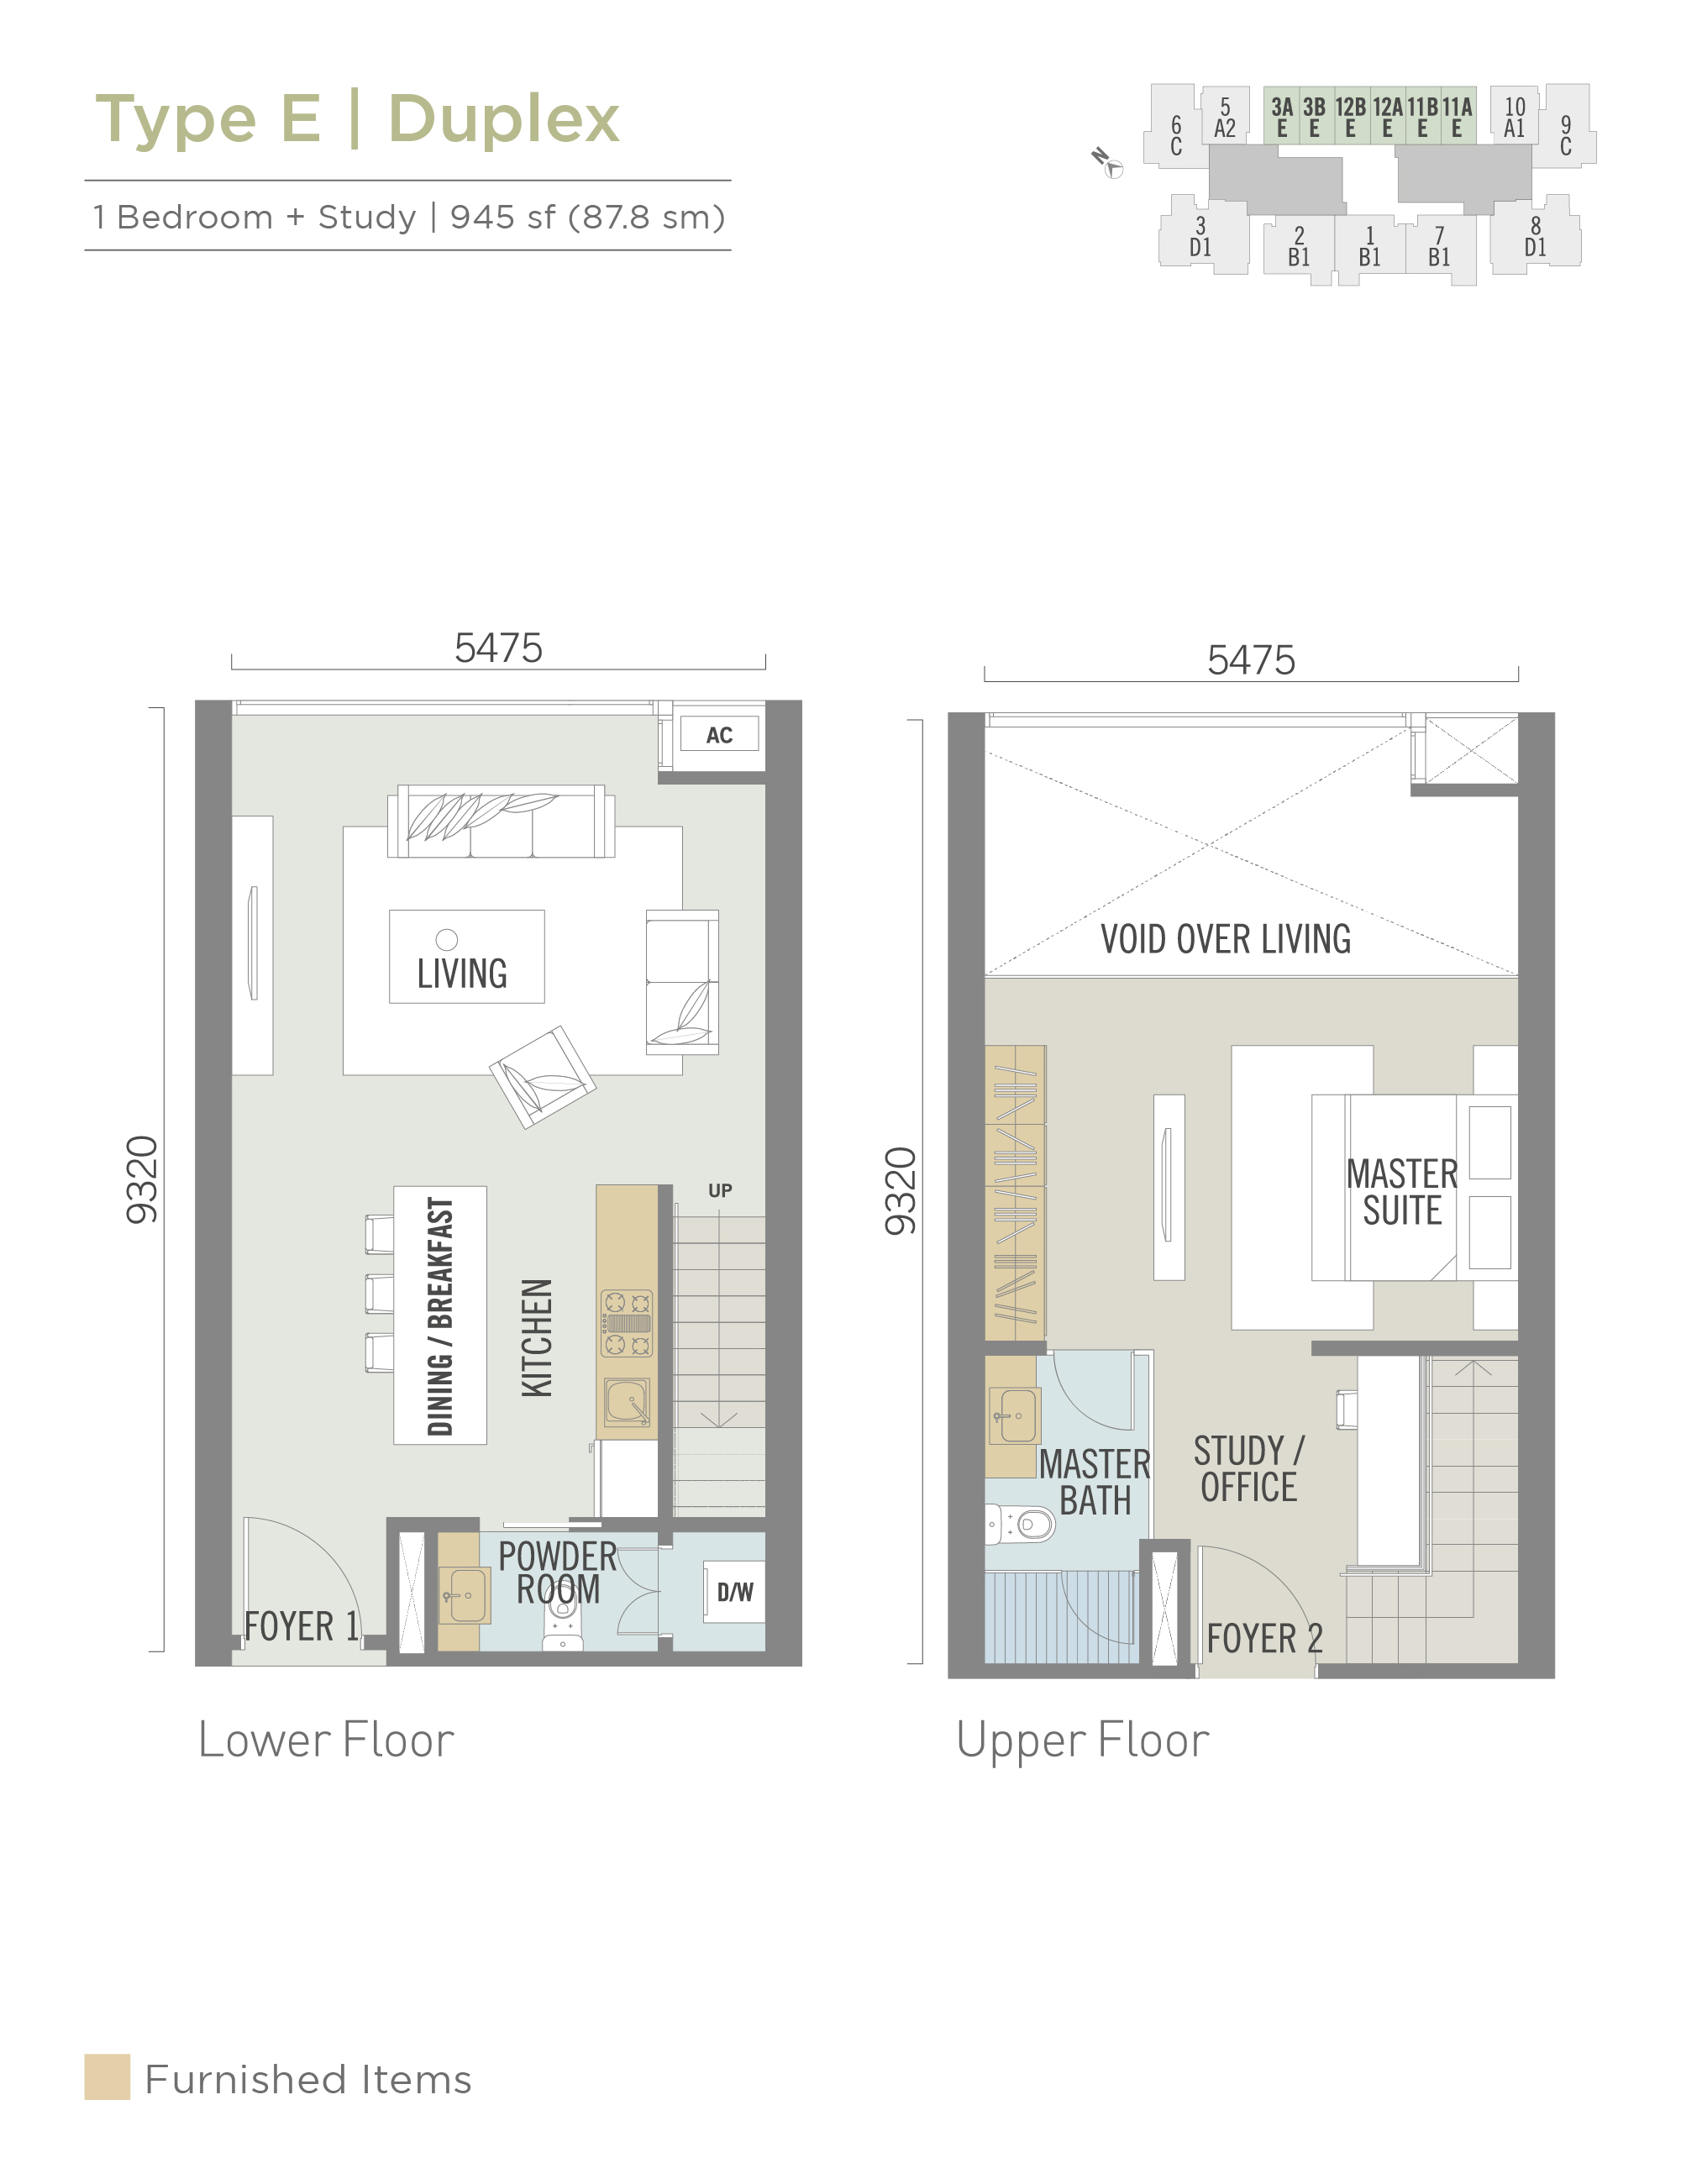 Type E|Typical Floor Plans